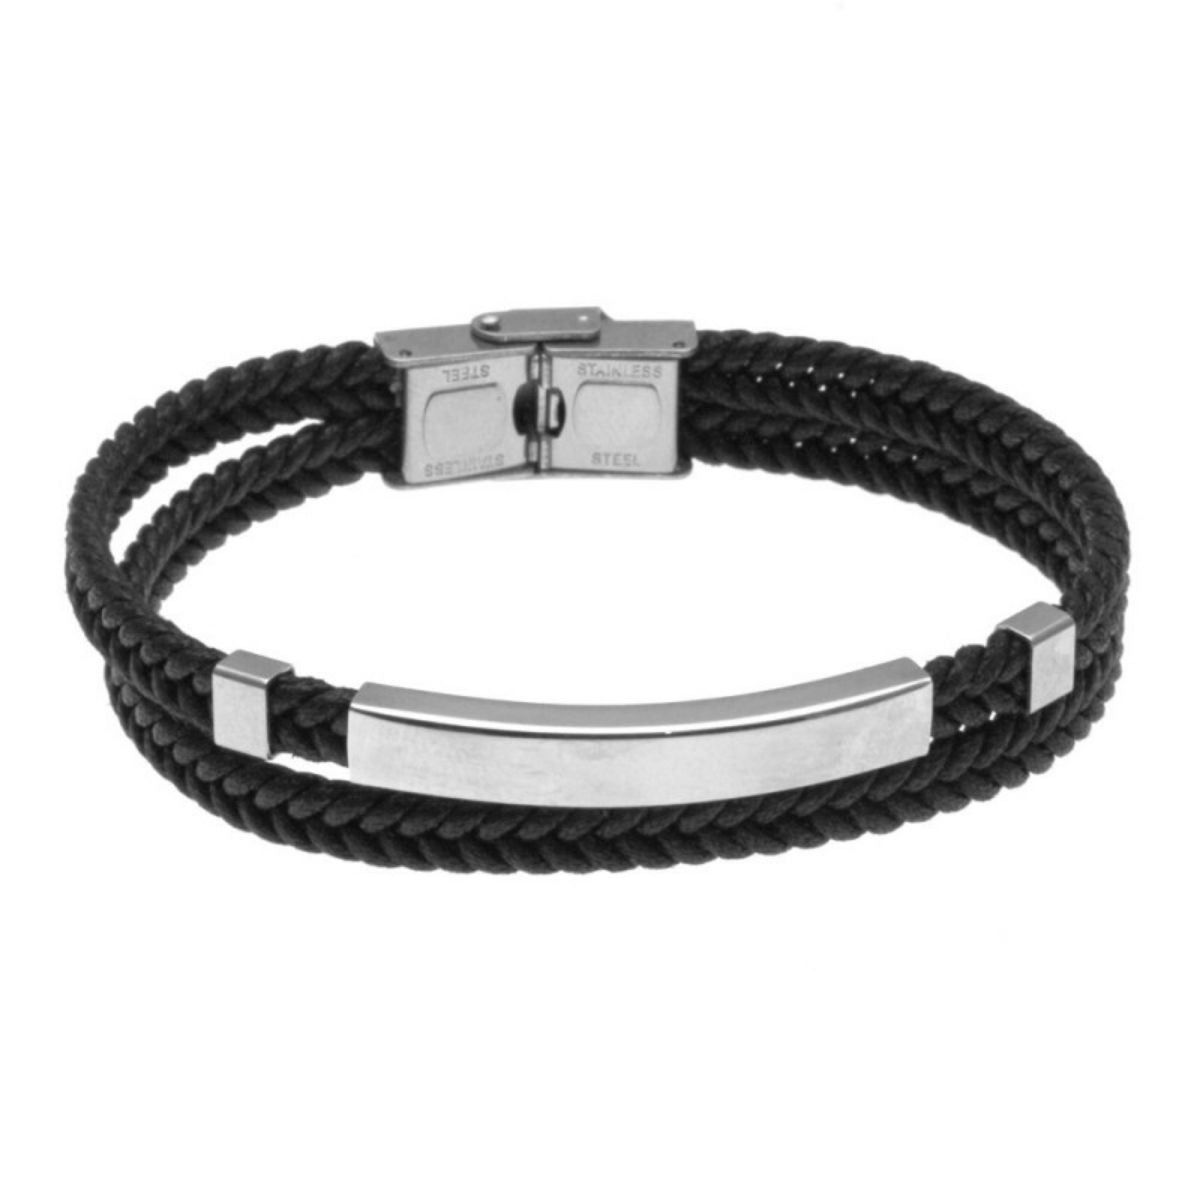 BRACELET WITH TWO BRAIDED LEATHER STRIPS